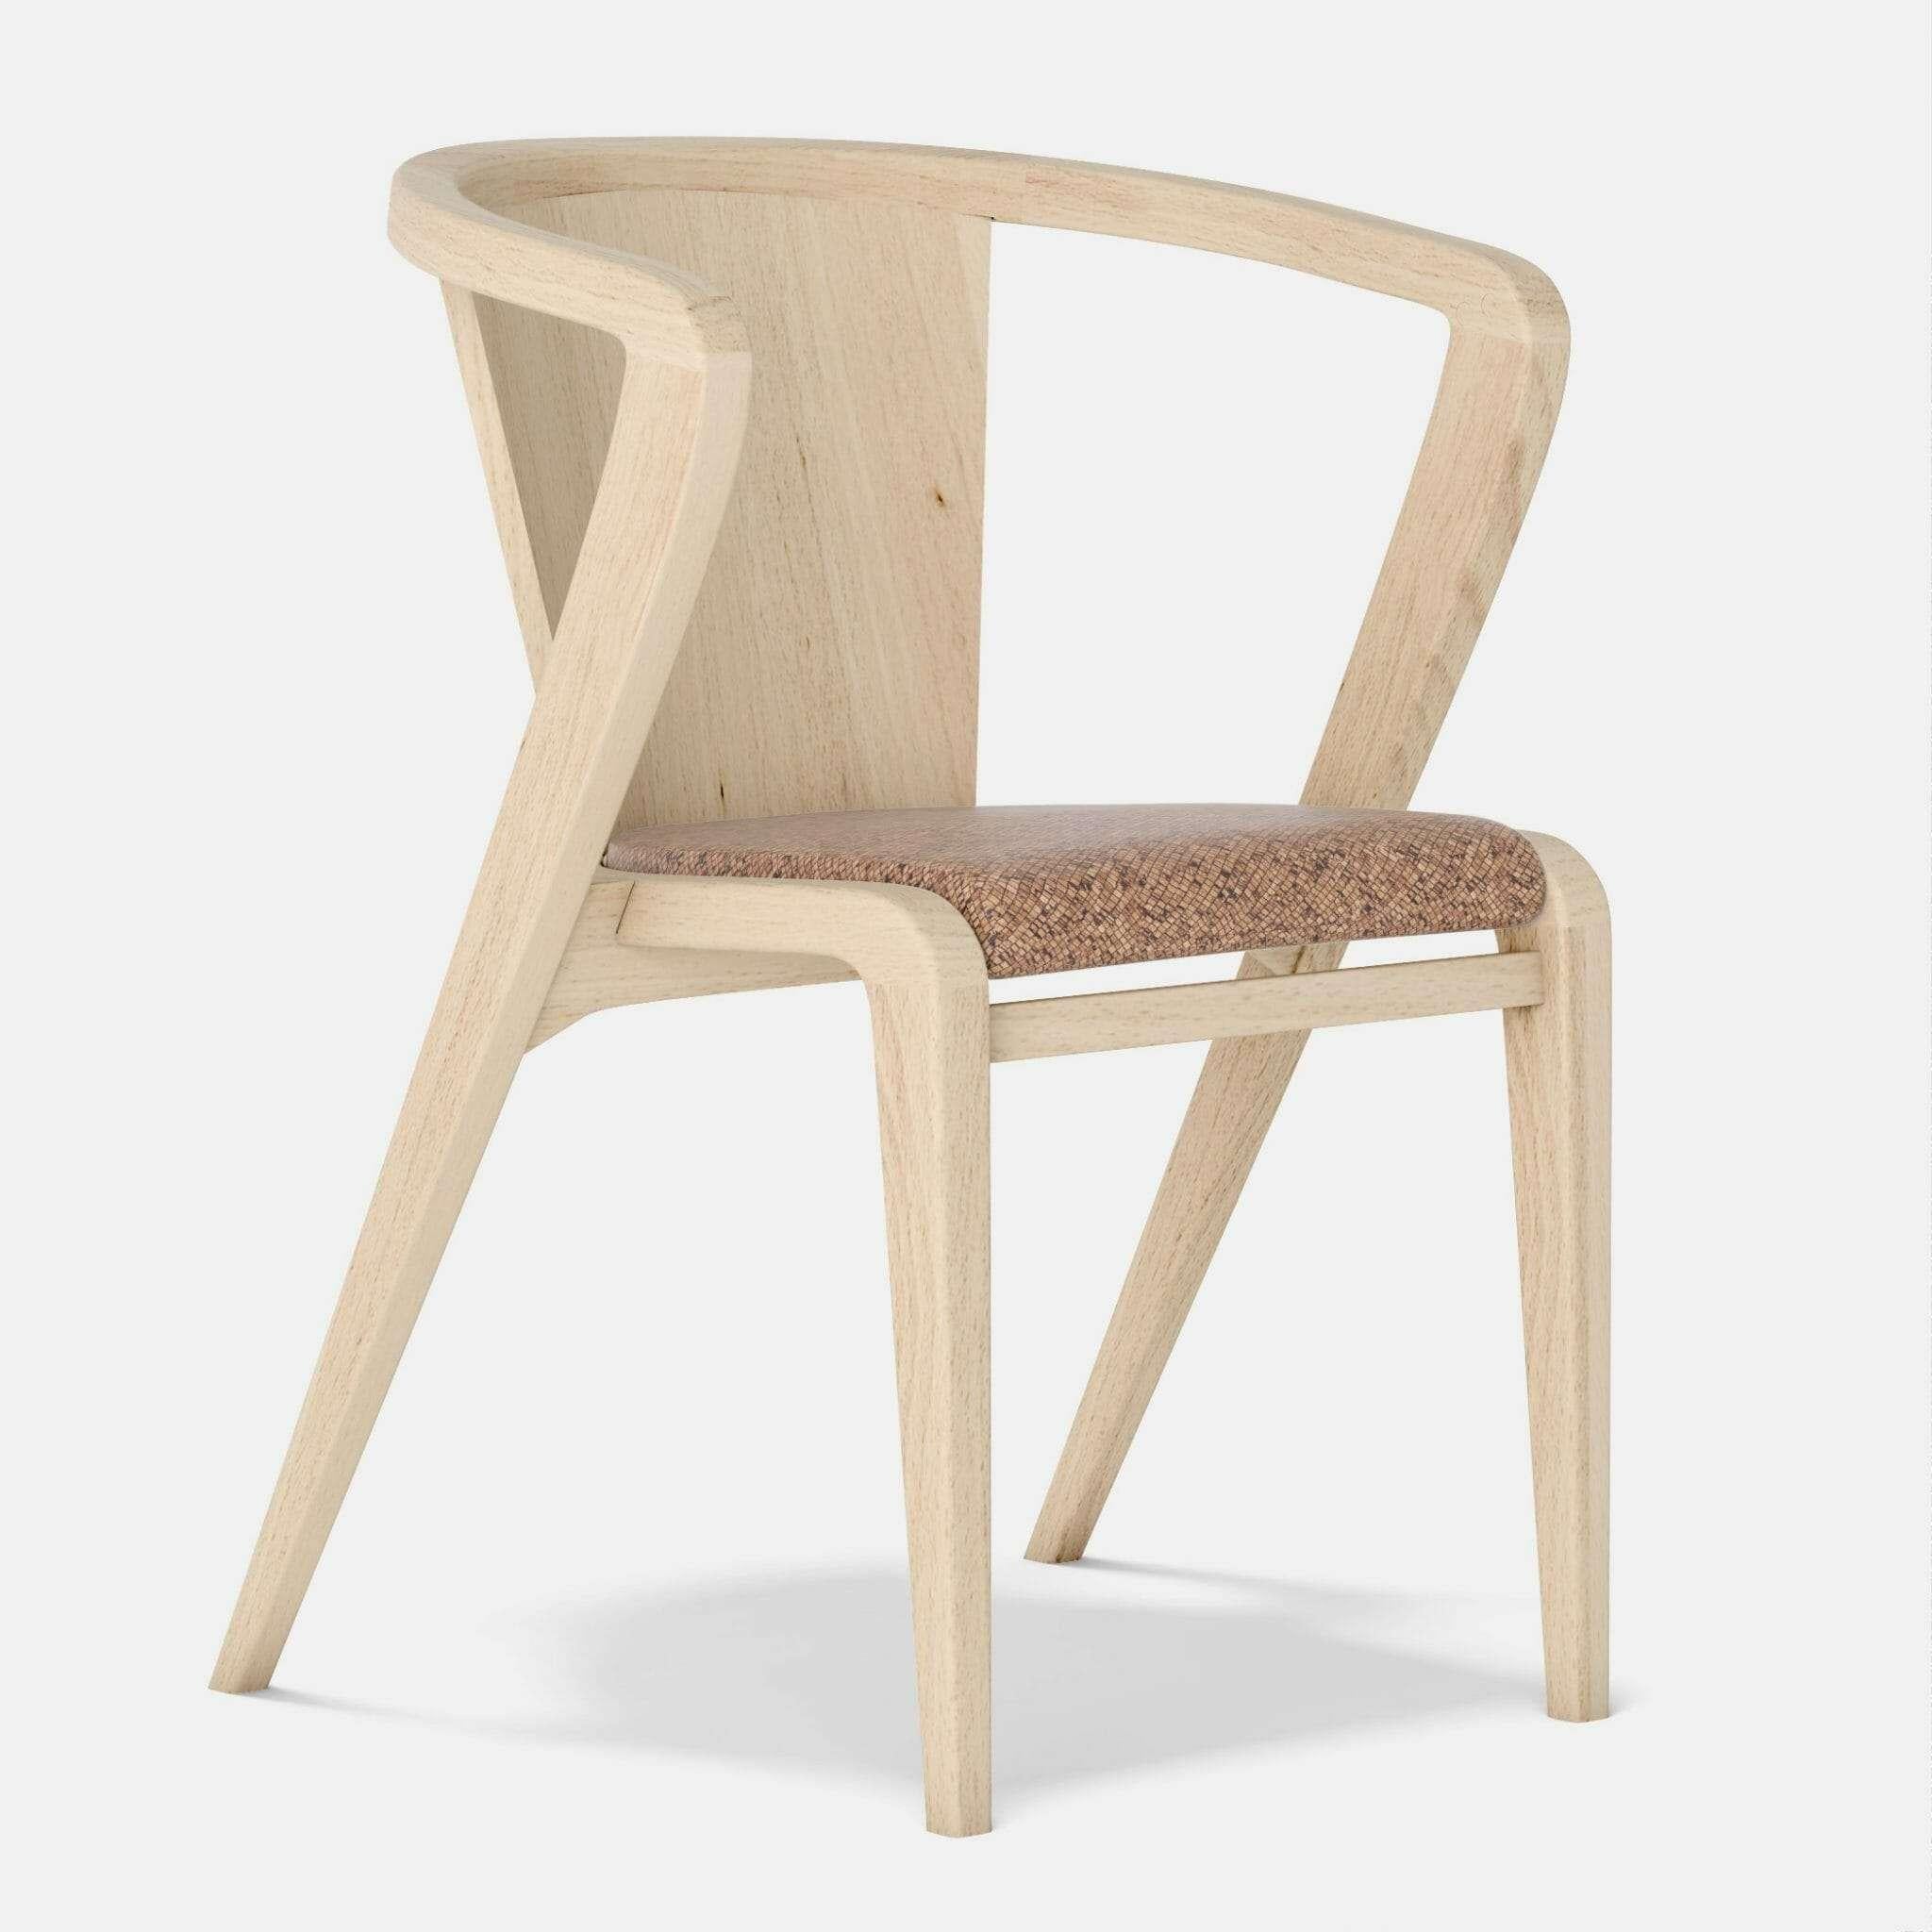 Ash and fabric Portuguese Roots chair by Alexandre Caldas
Dimensions: W 40 x D 39 x H 73 cm
Materials: Solid ashwood, fabric

Portuguese Roots Chair, was inspired by its original model from 1950, created by Gonçalo Rodrigues dos Santos and designed